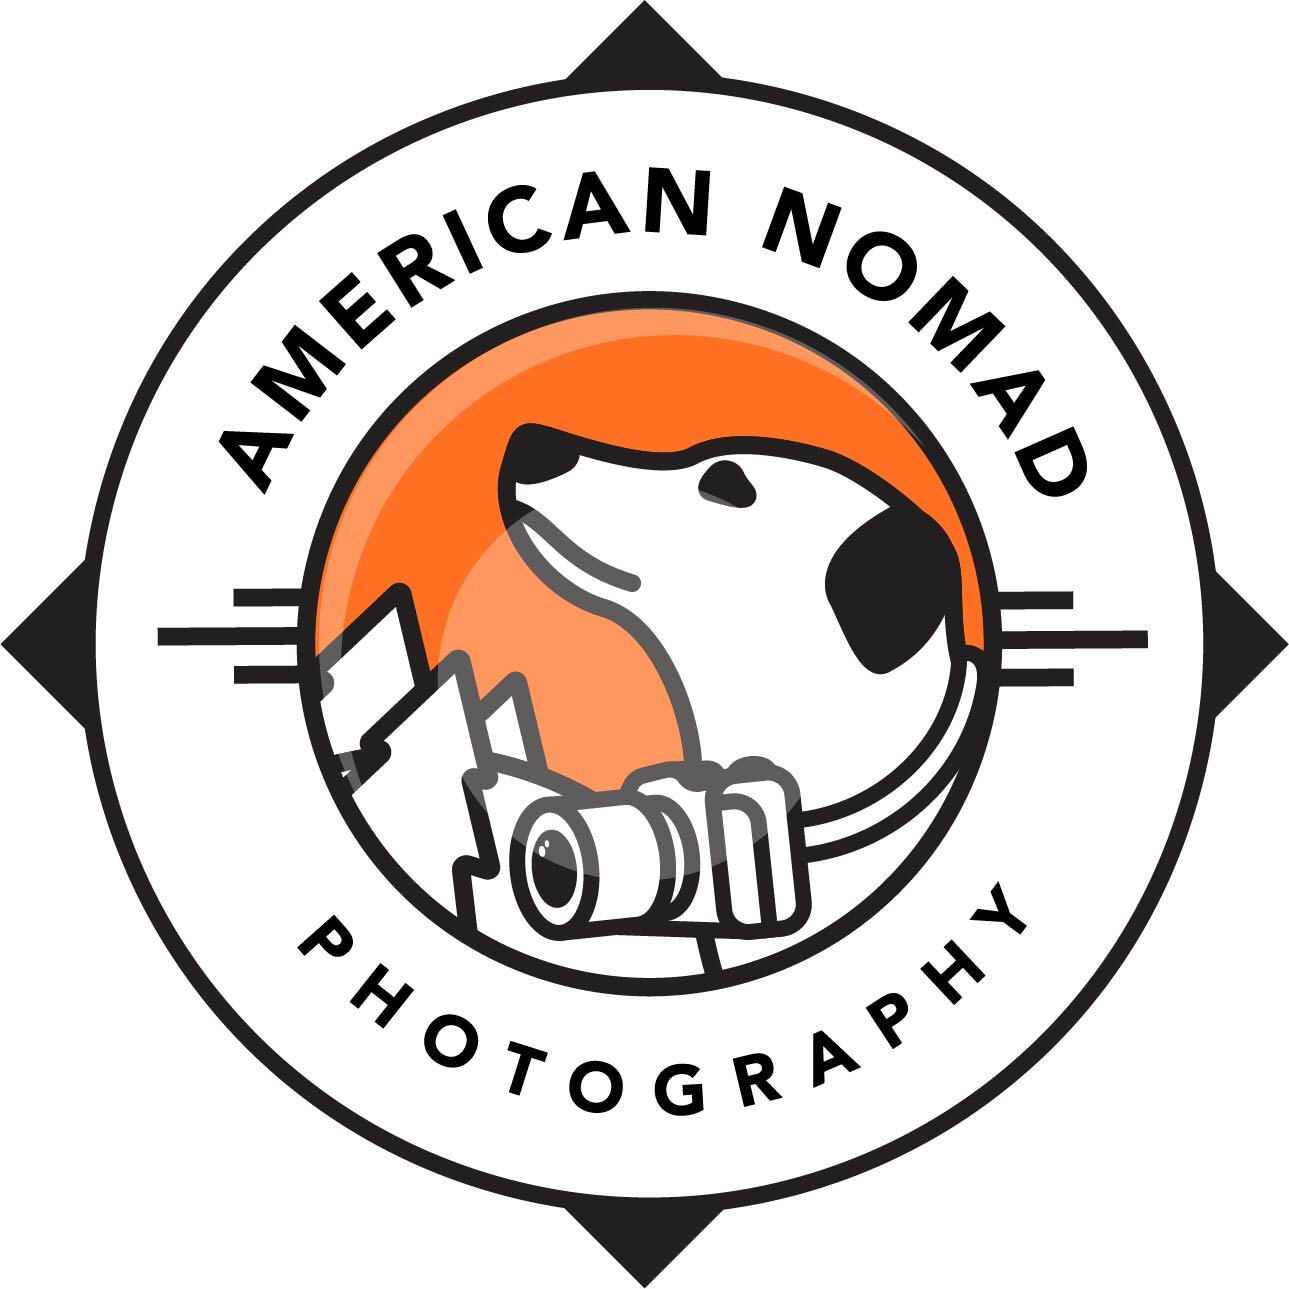 American Nomad Photography